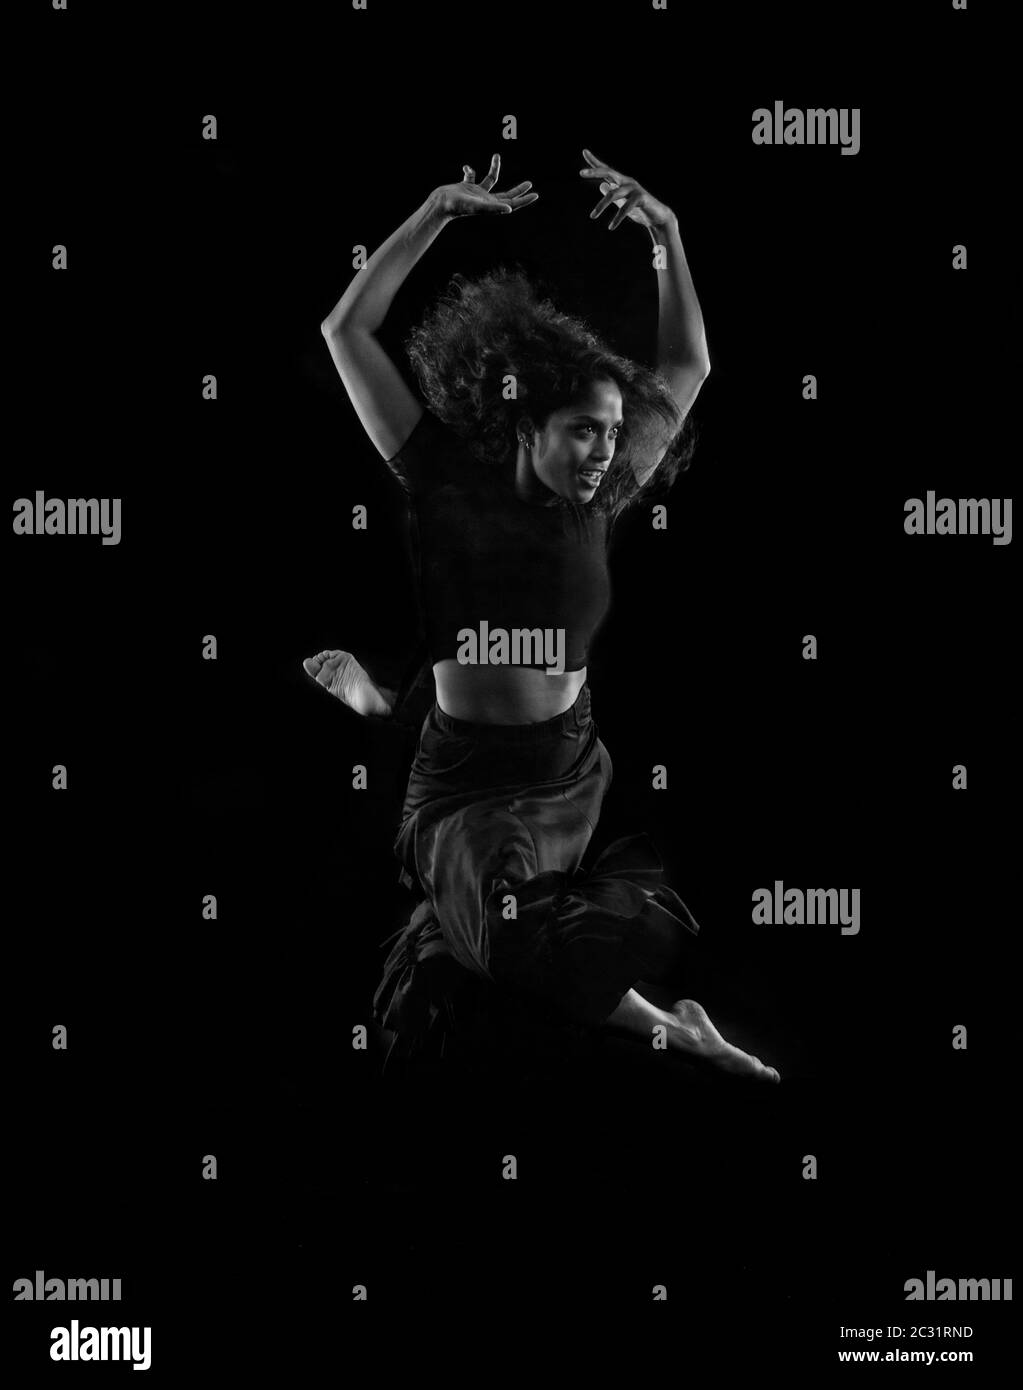 Dancing Black and White Stock Photos & Images - Alamy